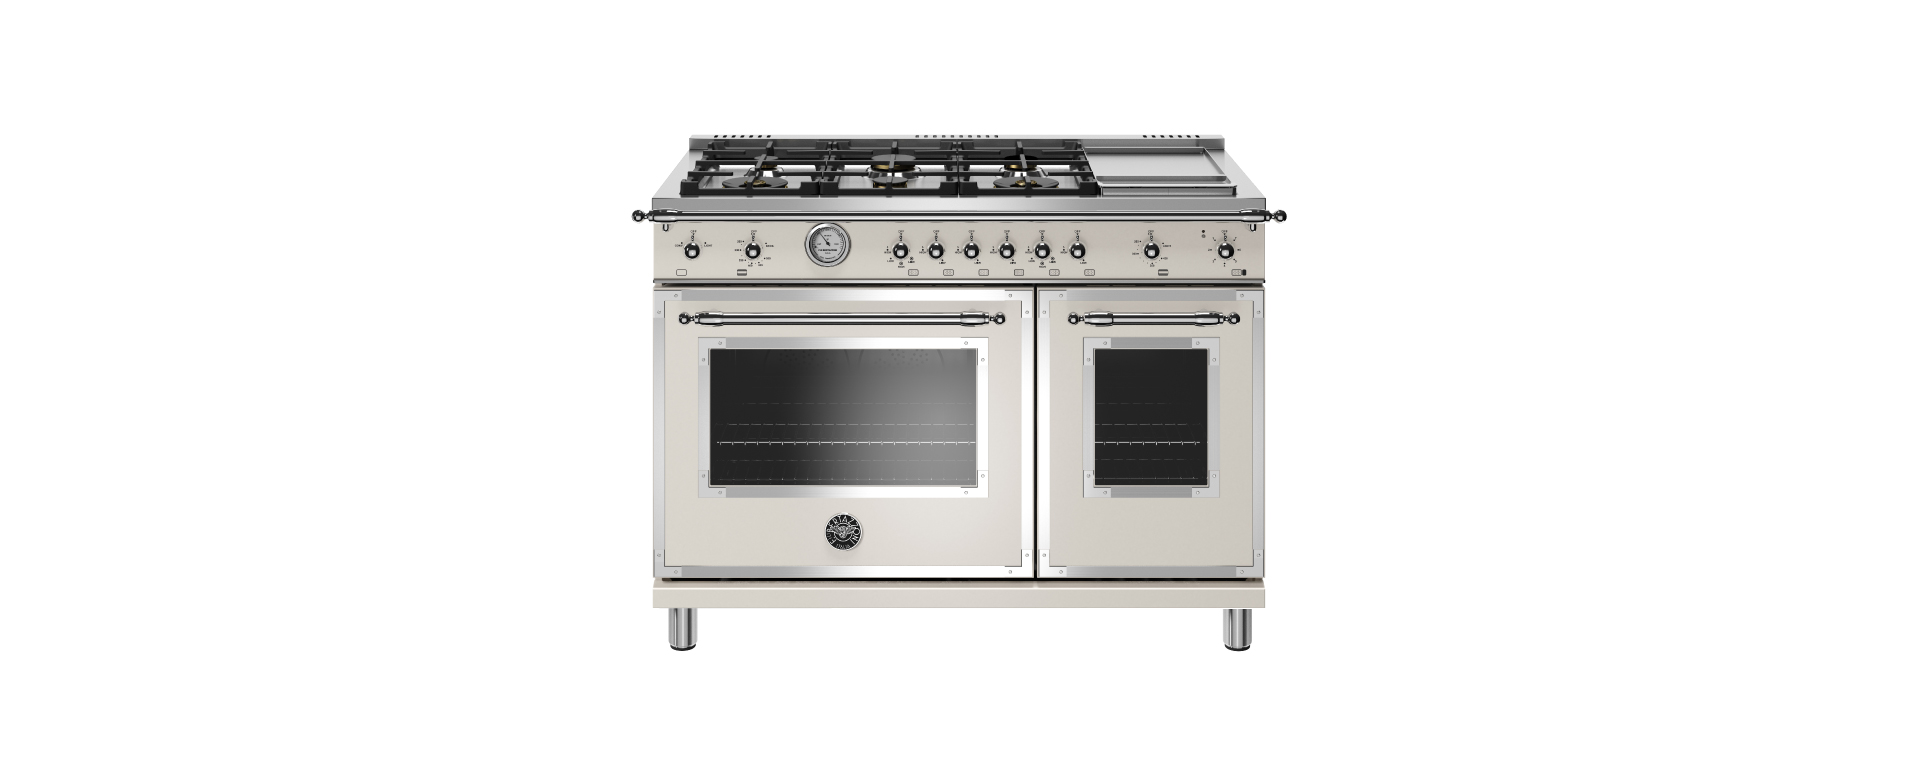 Bertazzoni Unveils the New Heritage Series, Transforming its Classic Offering with Enhanced Style and Standout Performance Features - Bertazzoni